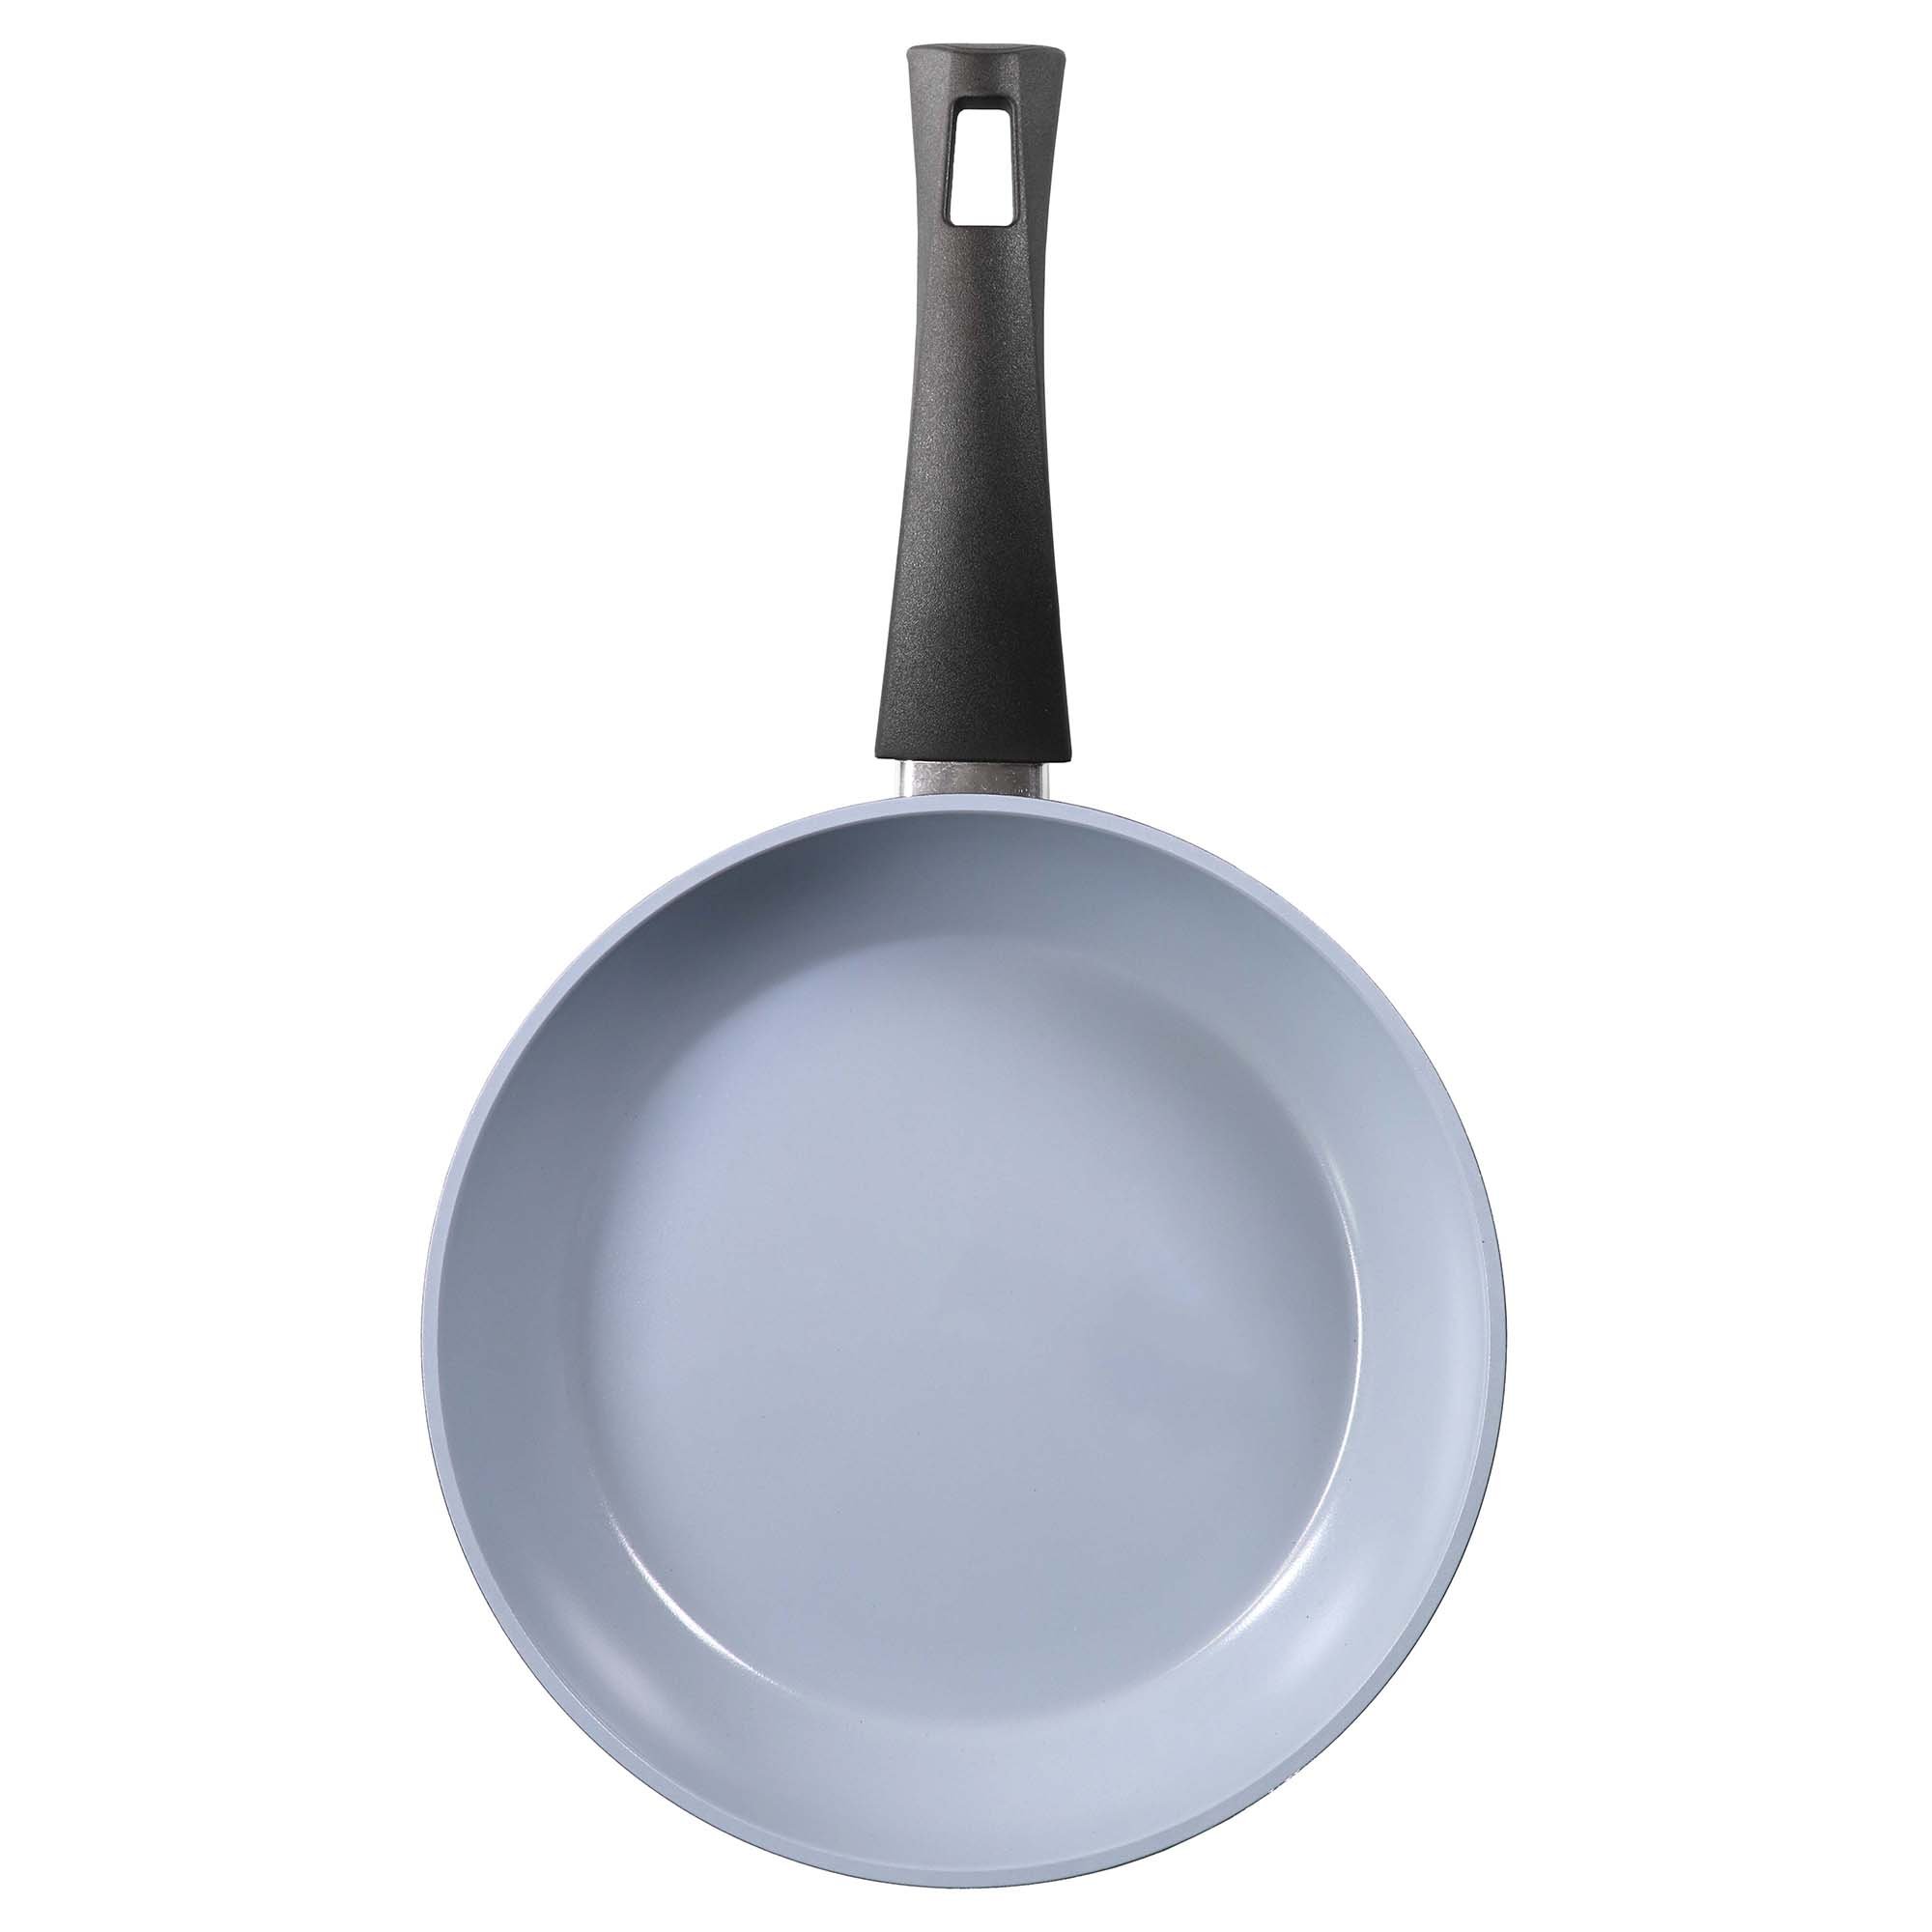 Natural Line® frying pan 24 cm, ceramic coating, induction and oven-safe